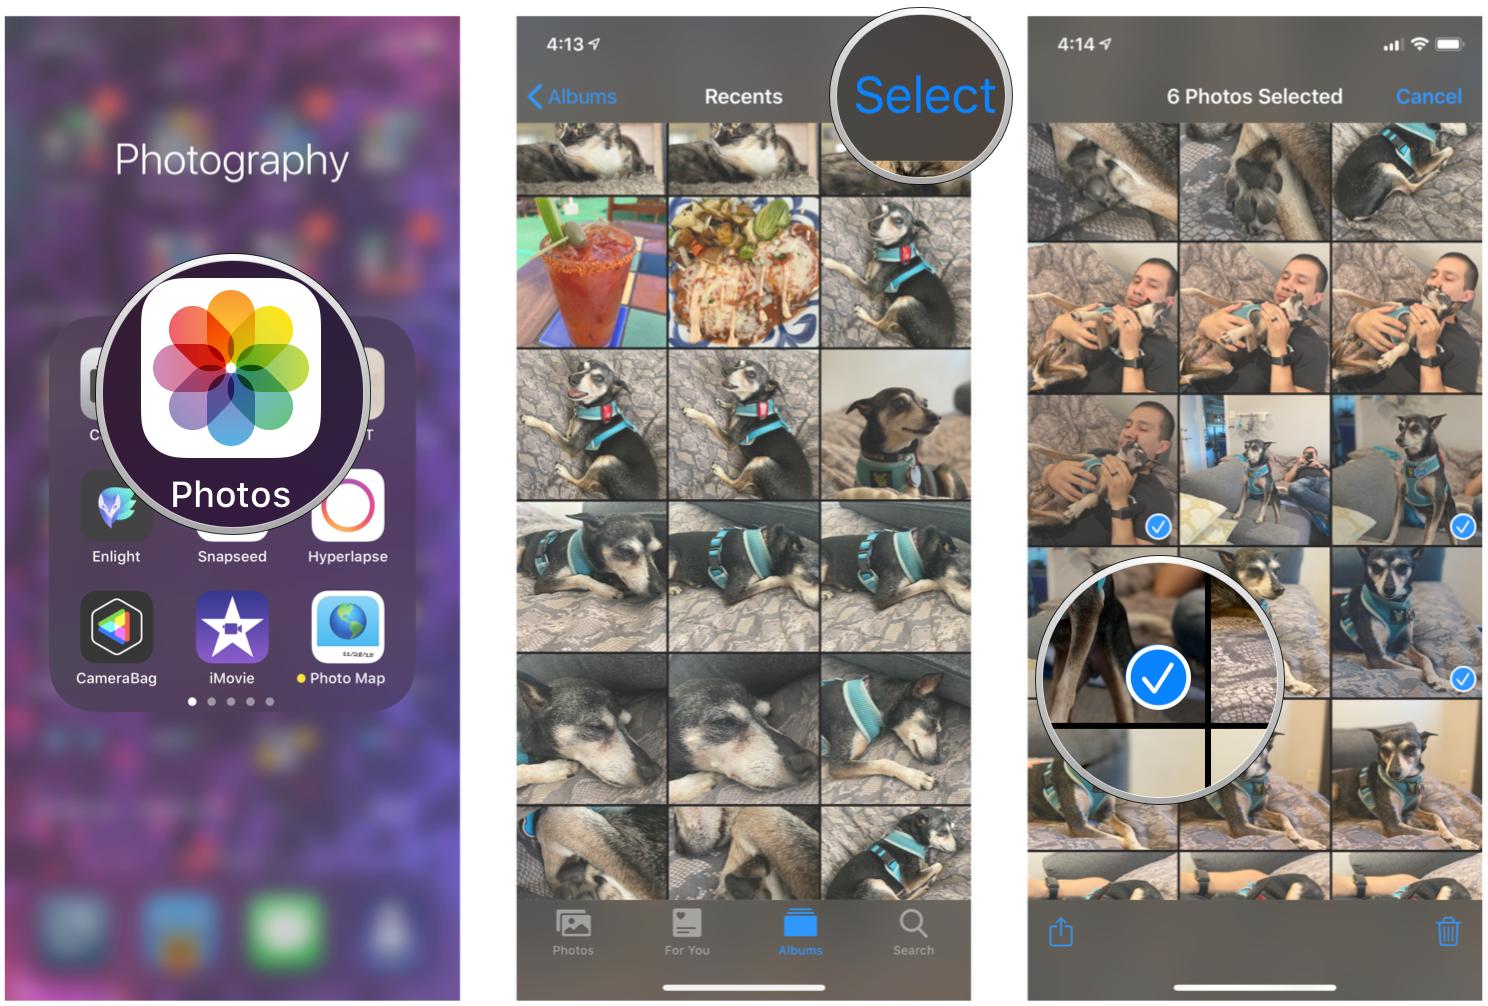 How to share multiple photos from the Photos app on iPhone by showing steps: Launch Photos, find the album with the photos you want to share, tap Select, pick your photos